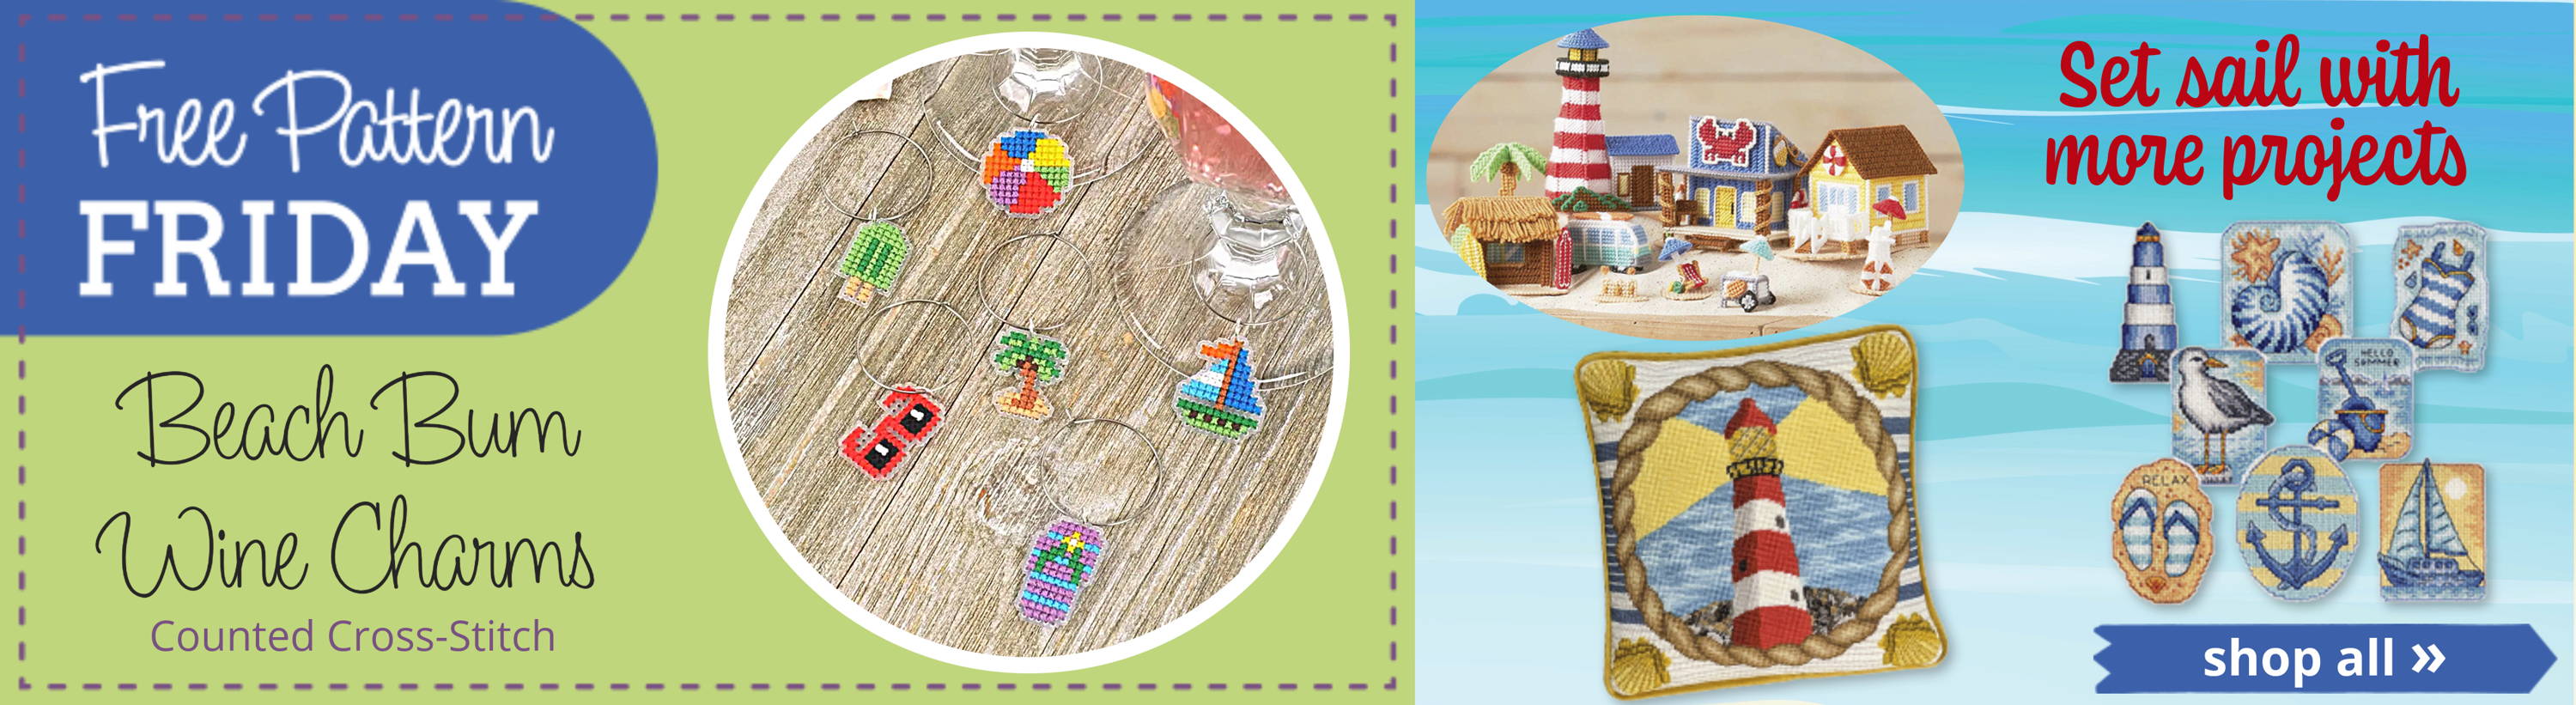 Free Pattern Friday! Beach Bum Wine Charms (Counted Cross-Stitch). Plus, set sail with more needlework projects. Image: Beach Bum Wine Charms and more nautical projects.